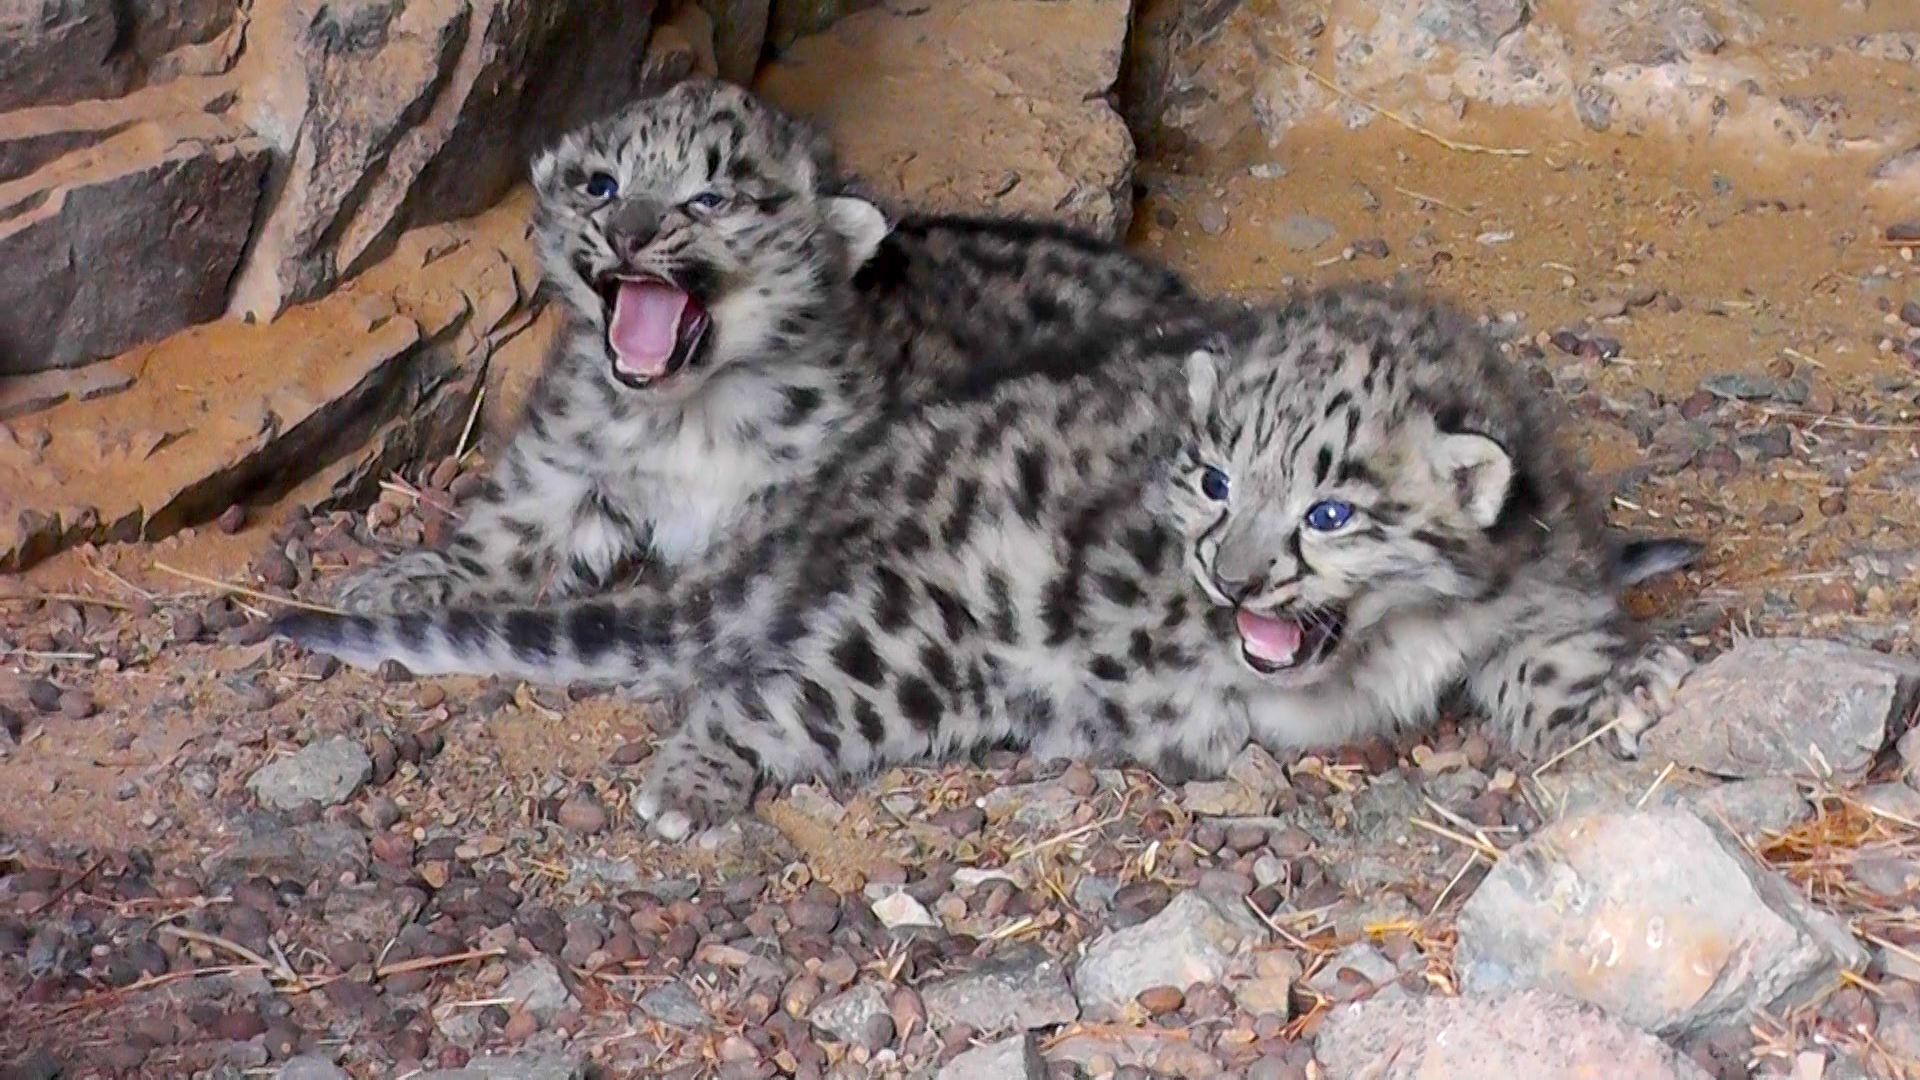 Rare Video Spots Endangered Snow Leopard Cubs in the Wild